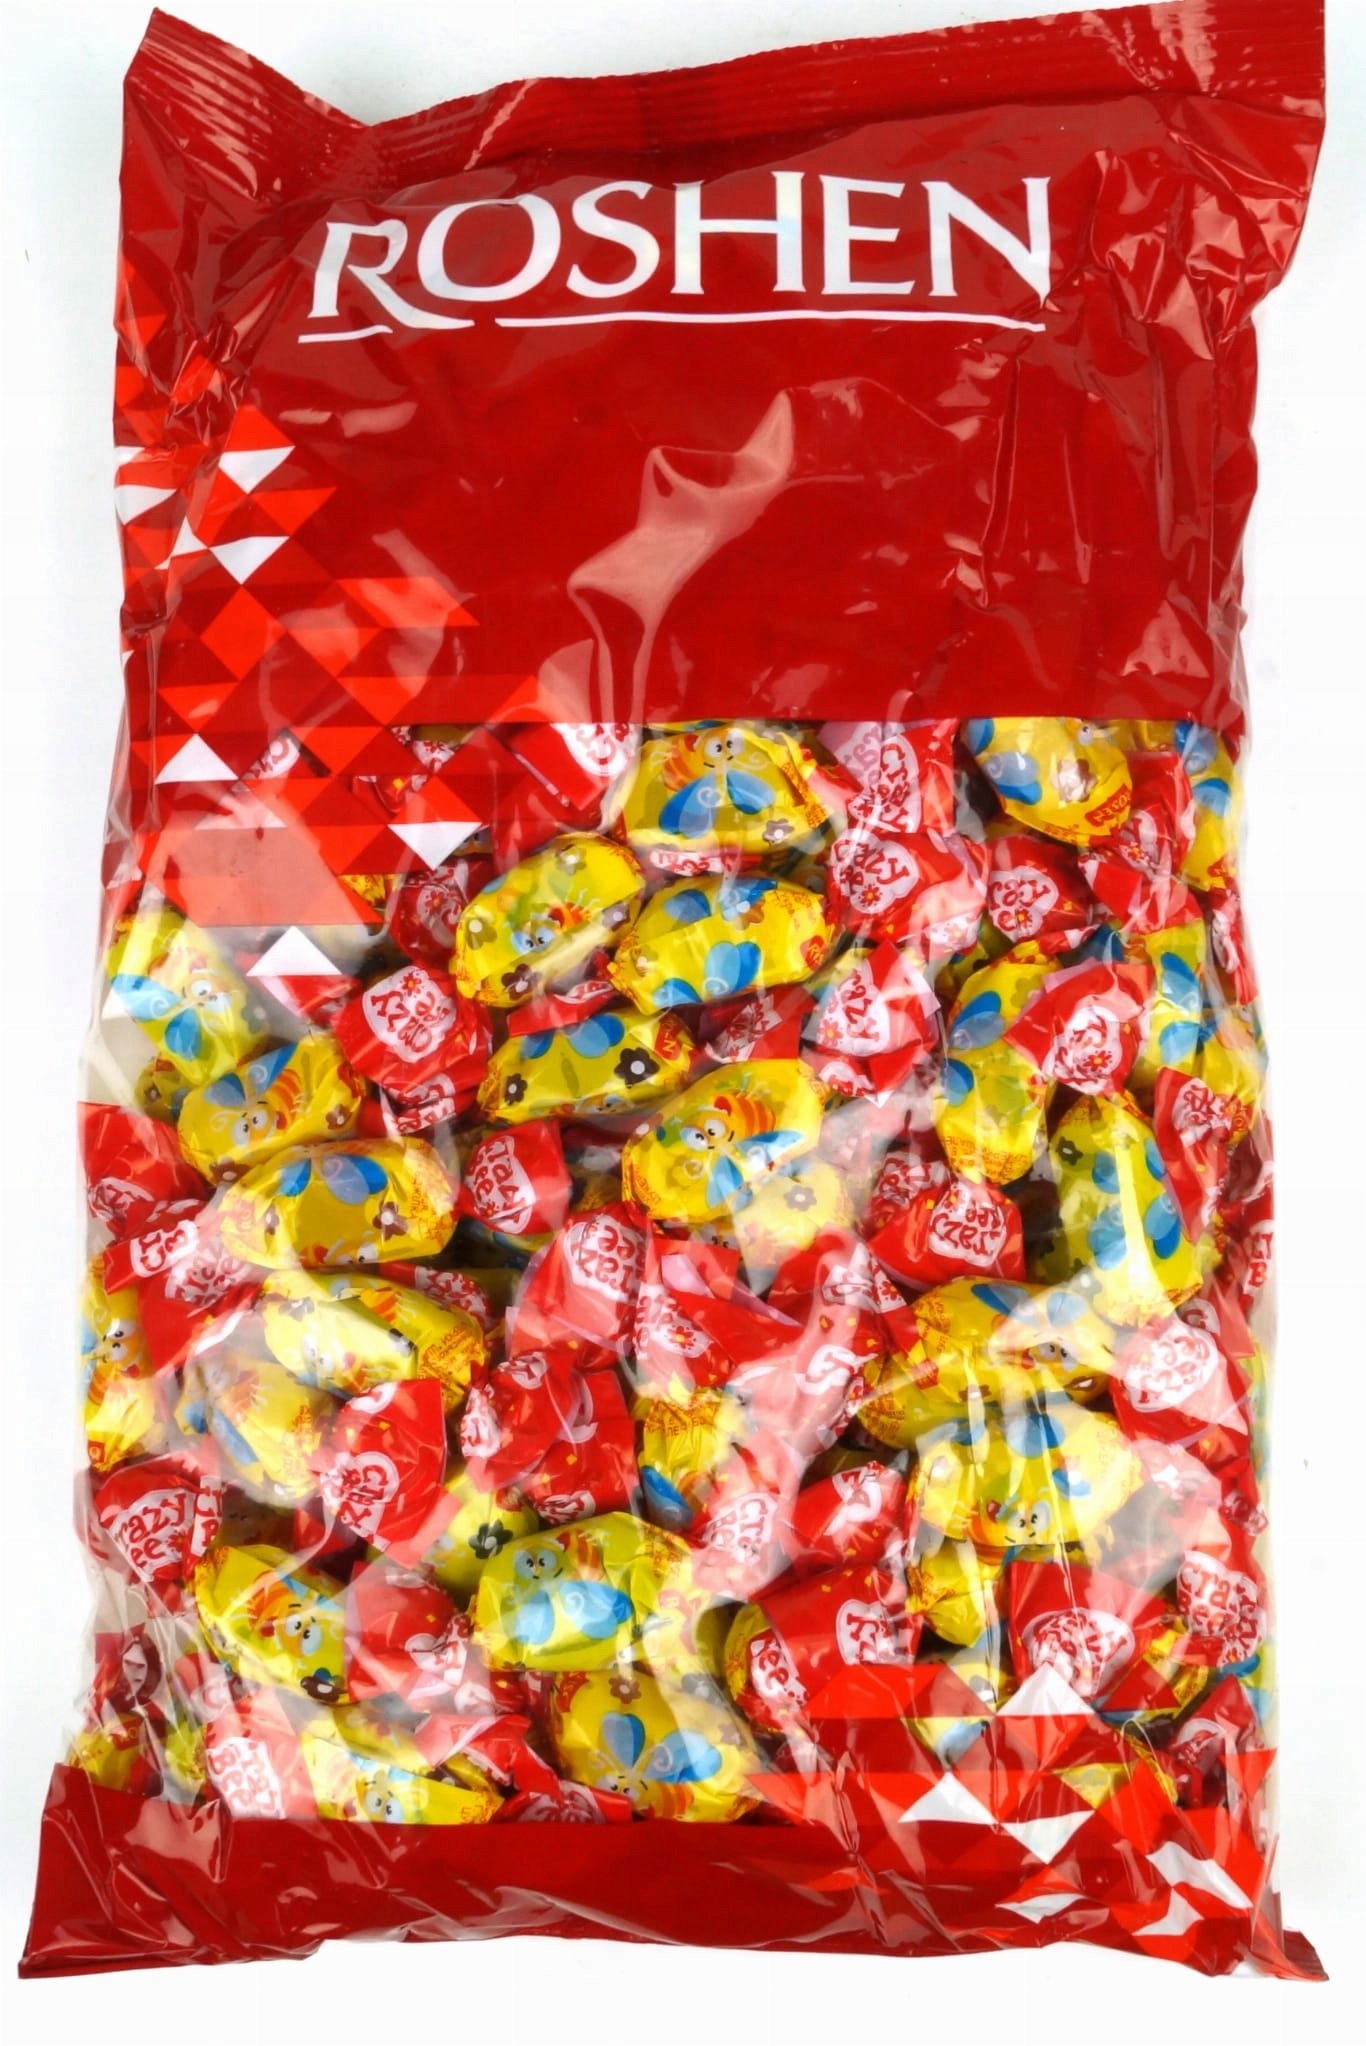 Roshen Crazy Bee Frutty Jelly Candy, 2.2 lbs/ 1 Kg